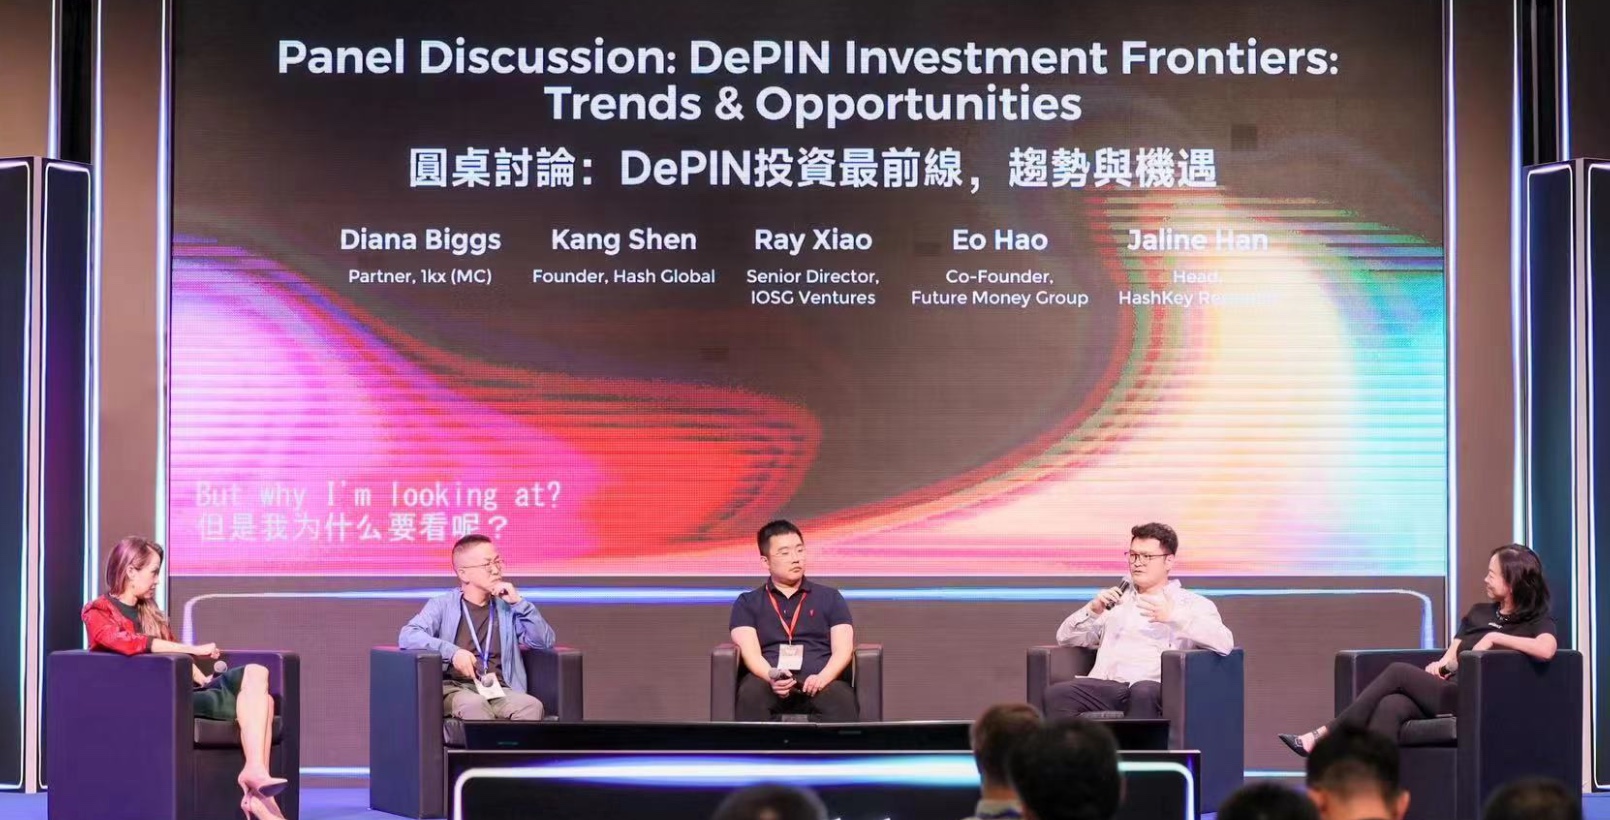 EO is sharing DePIN opportunities on Web3 festival 2024. Source: FutureMoney Group